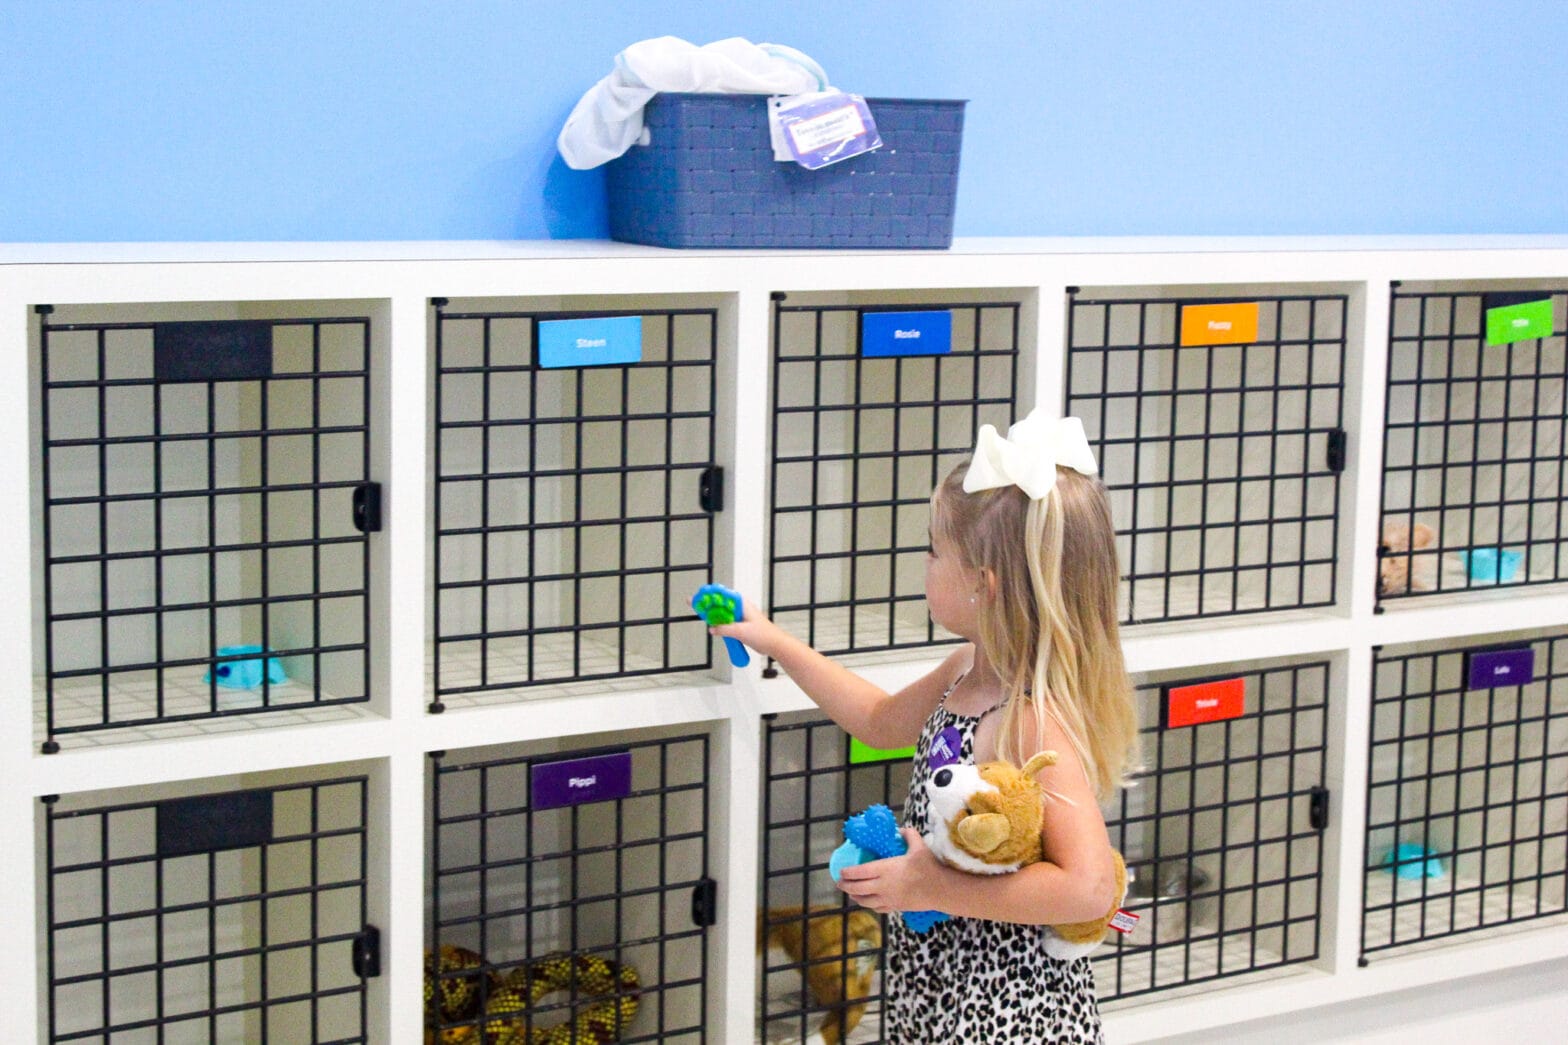 A little girl opening up the toy crates where the toy animals are located